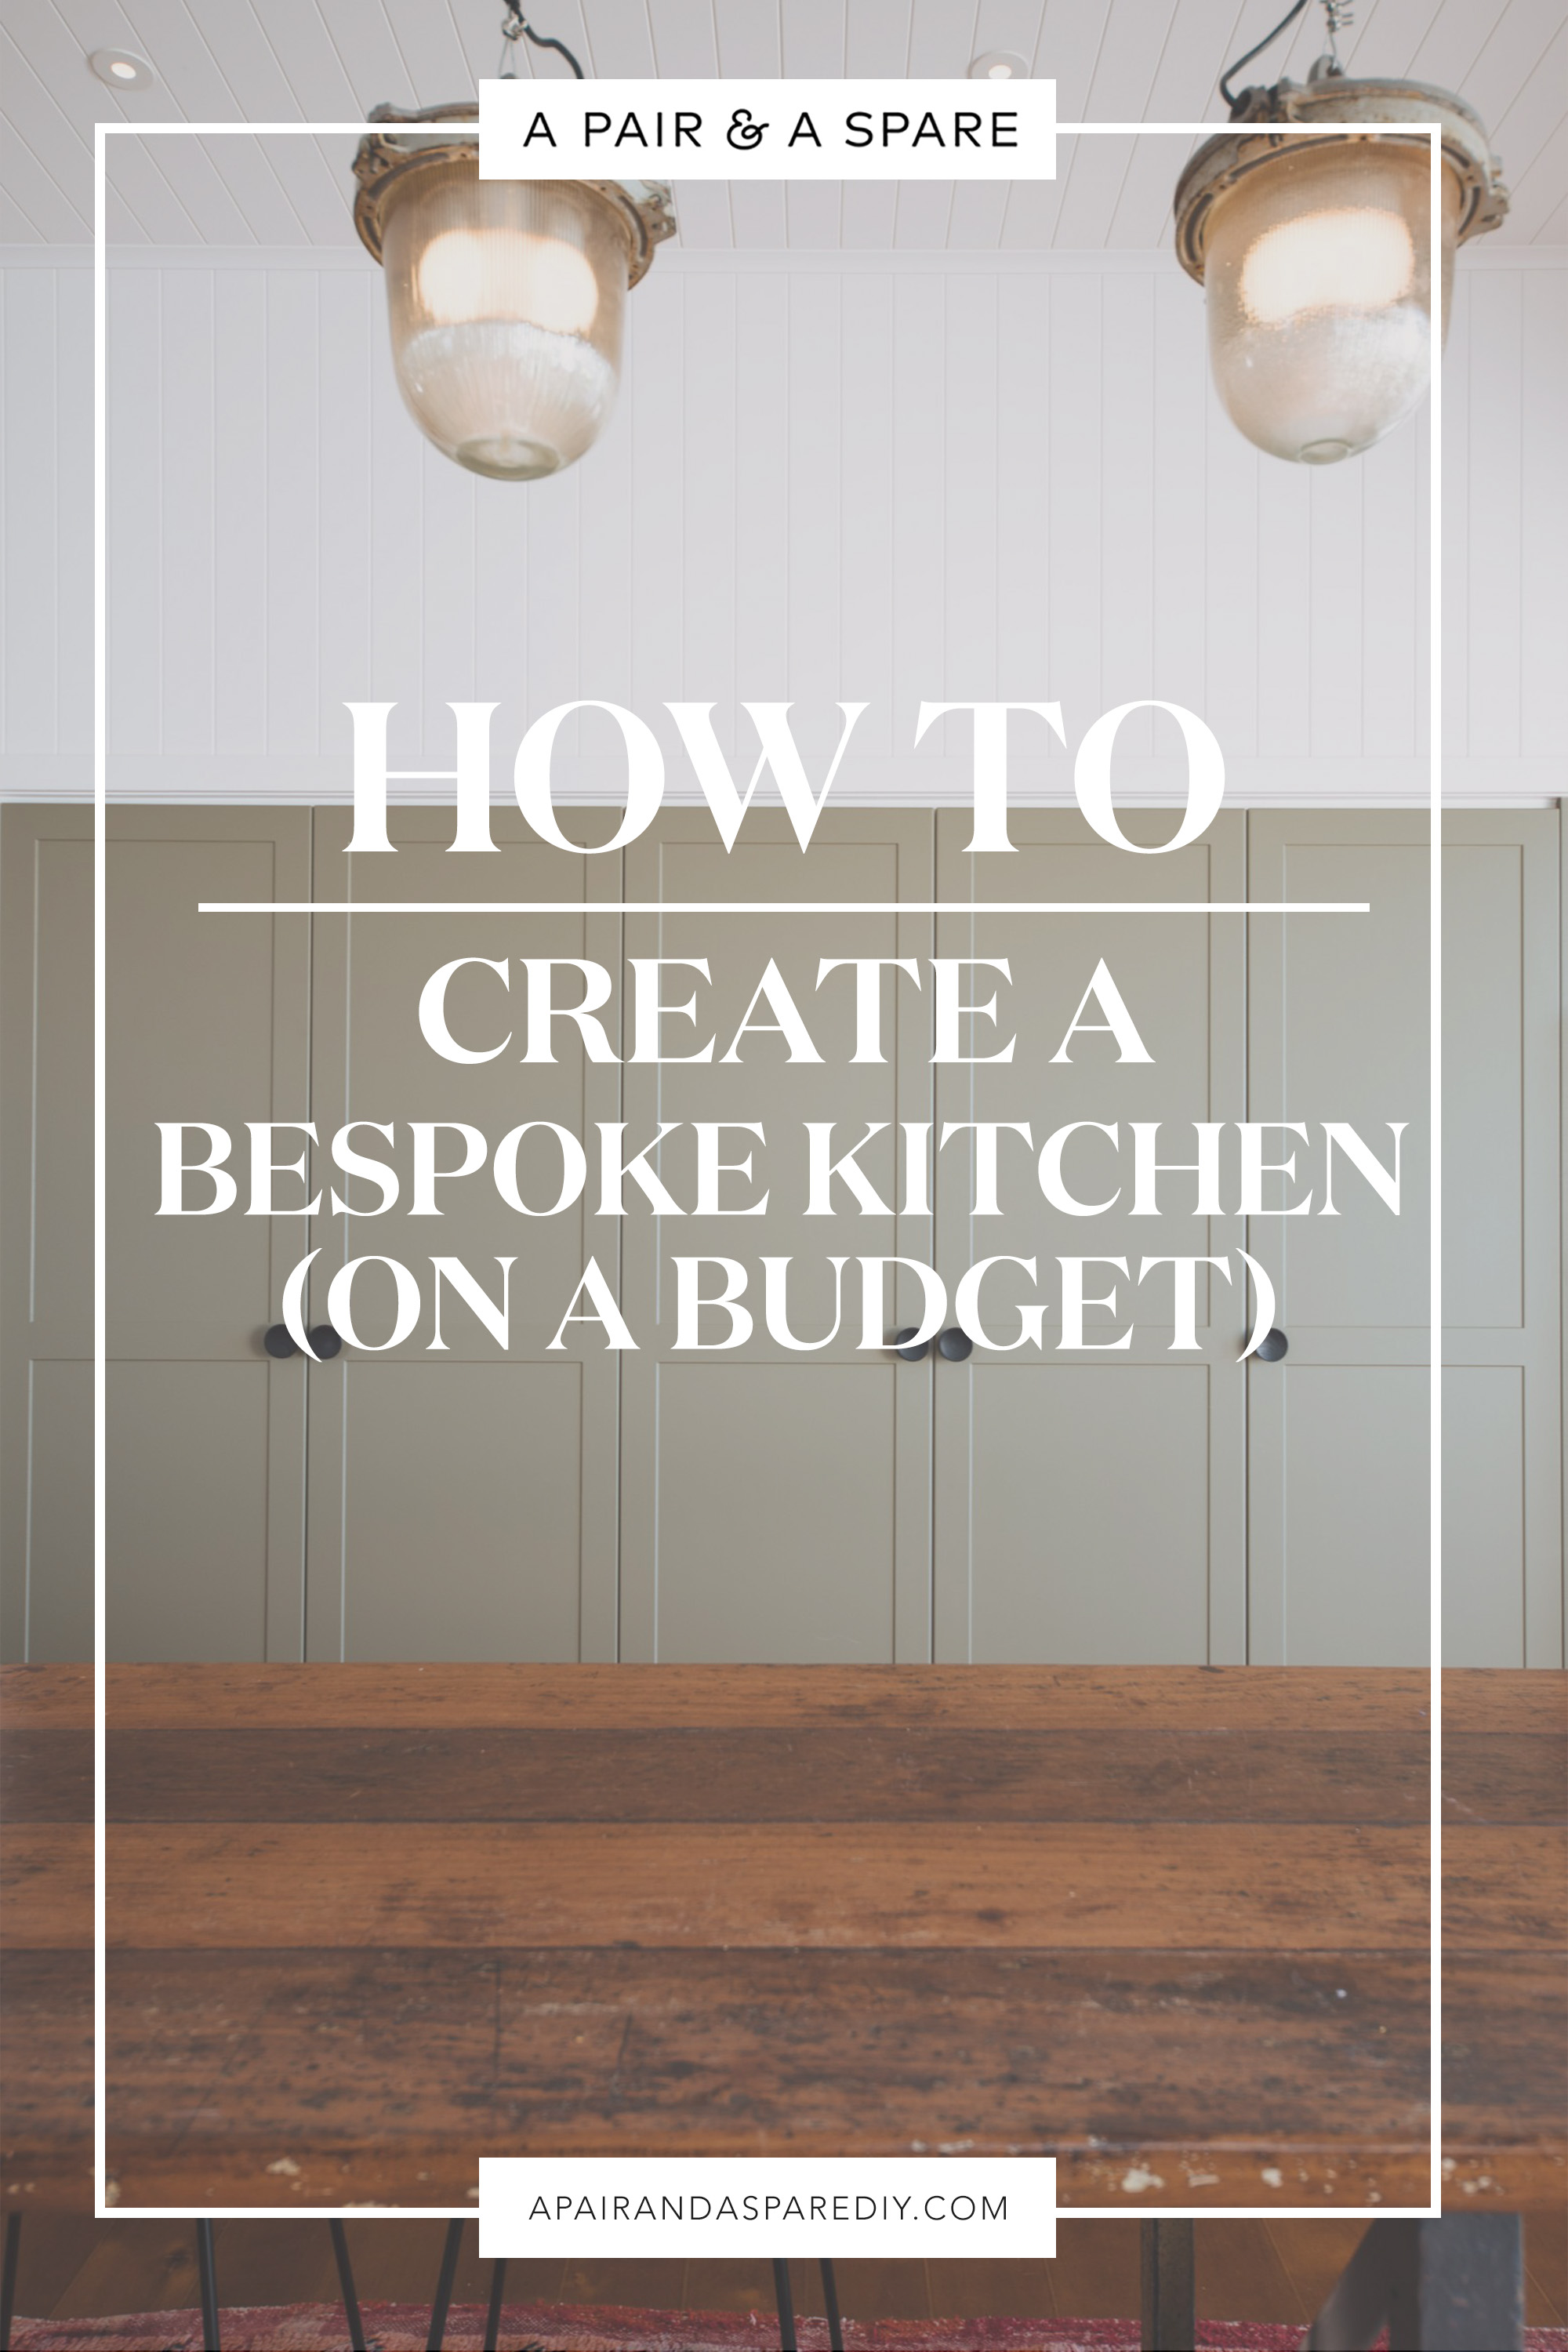 How to create a bespoke kitchen